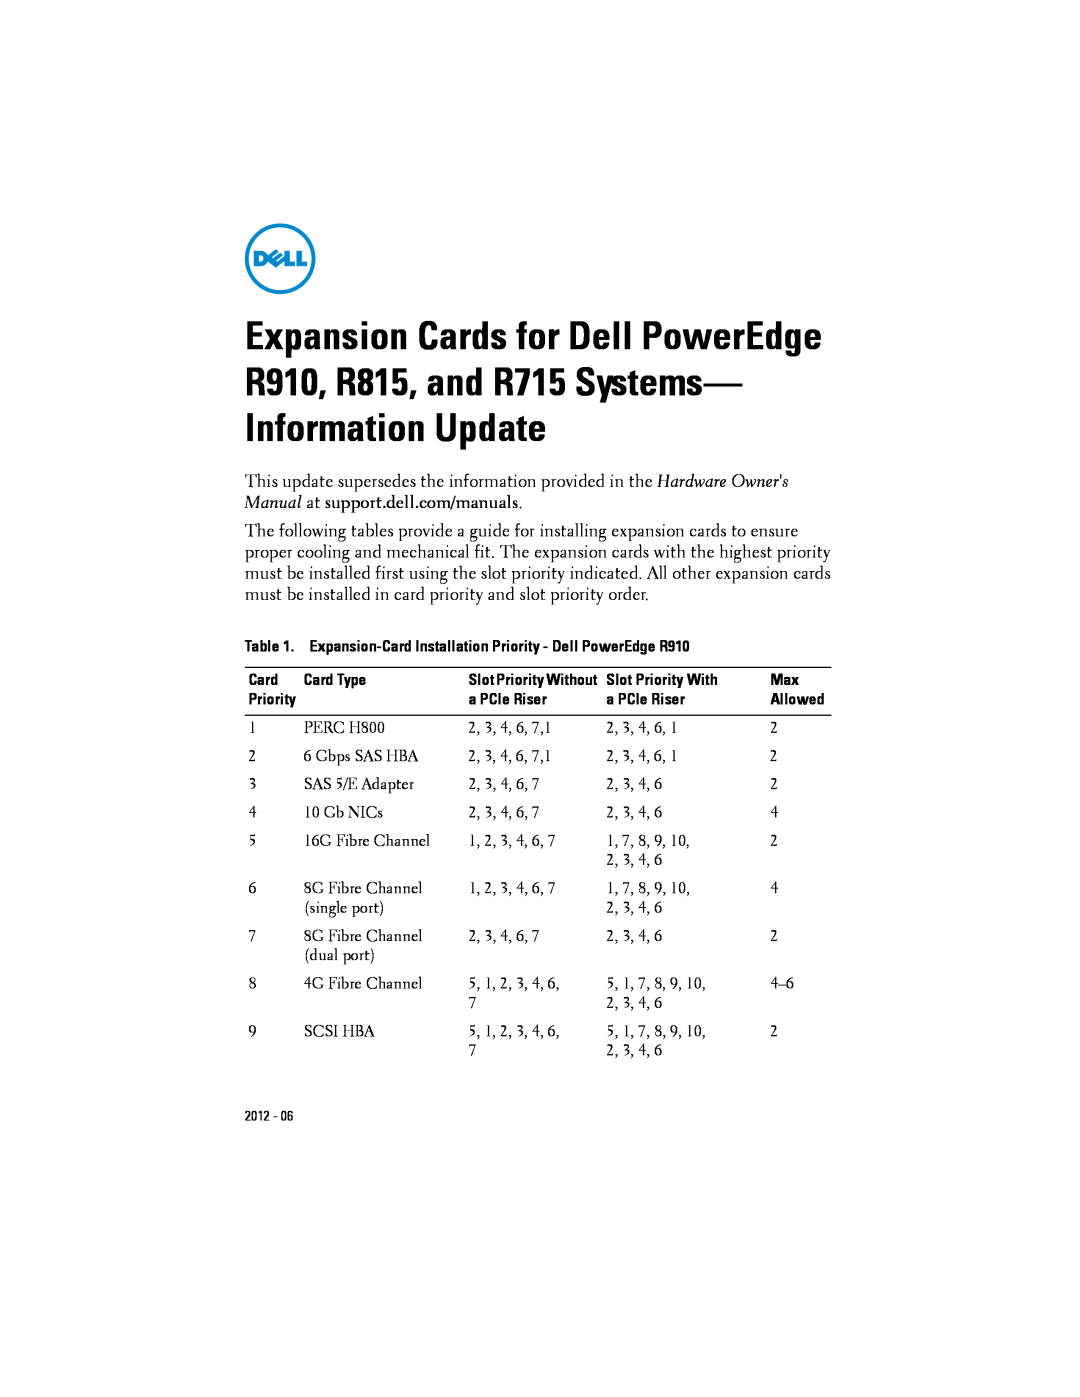 Dell manual Dell PowerEdge 11th Generation Servers R810 R910, and M910 Memory, Guidance 